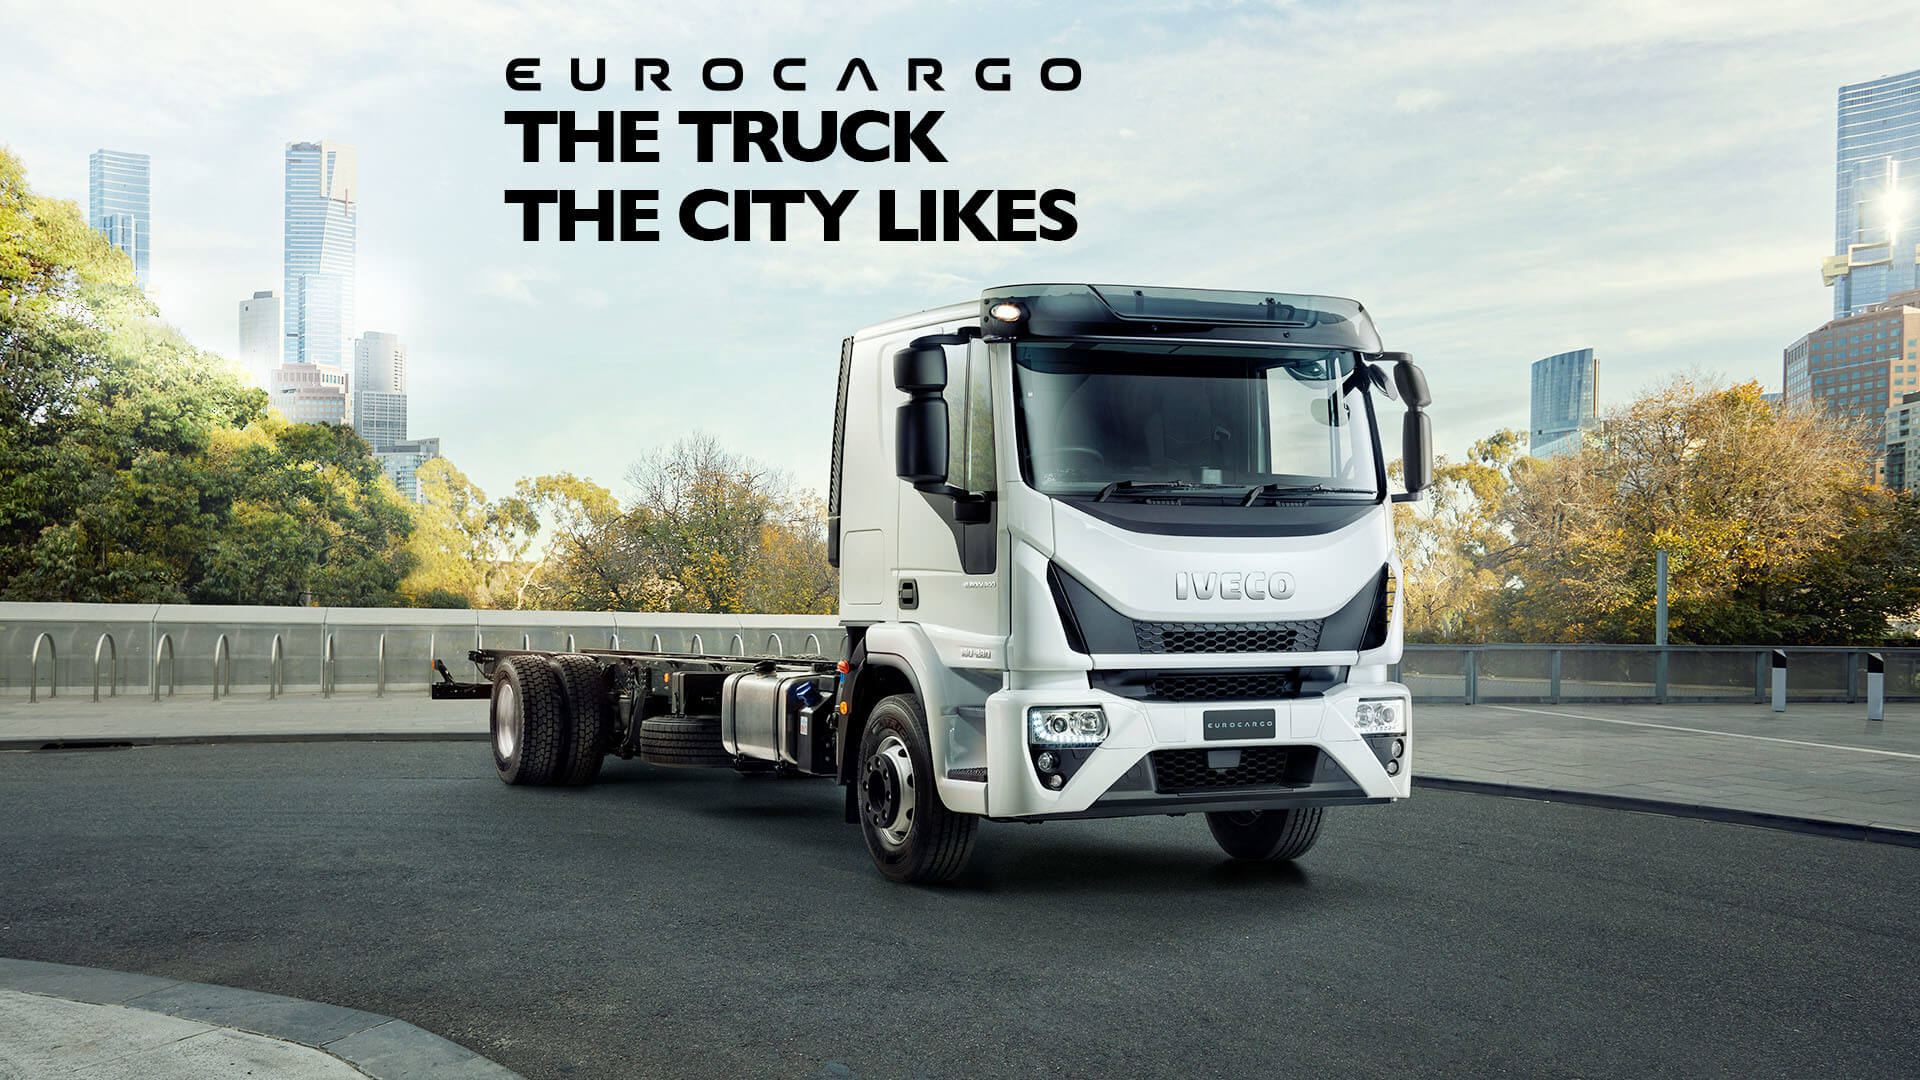 Eurocargo the truck the city likes